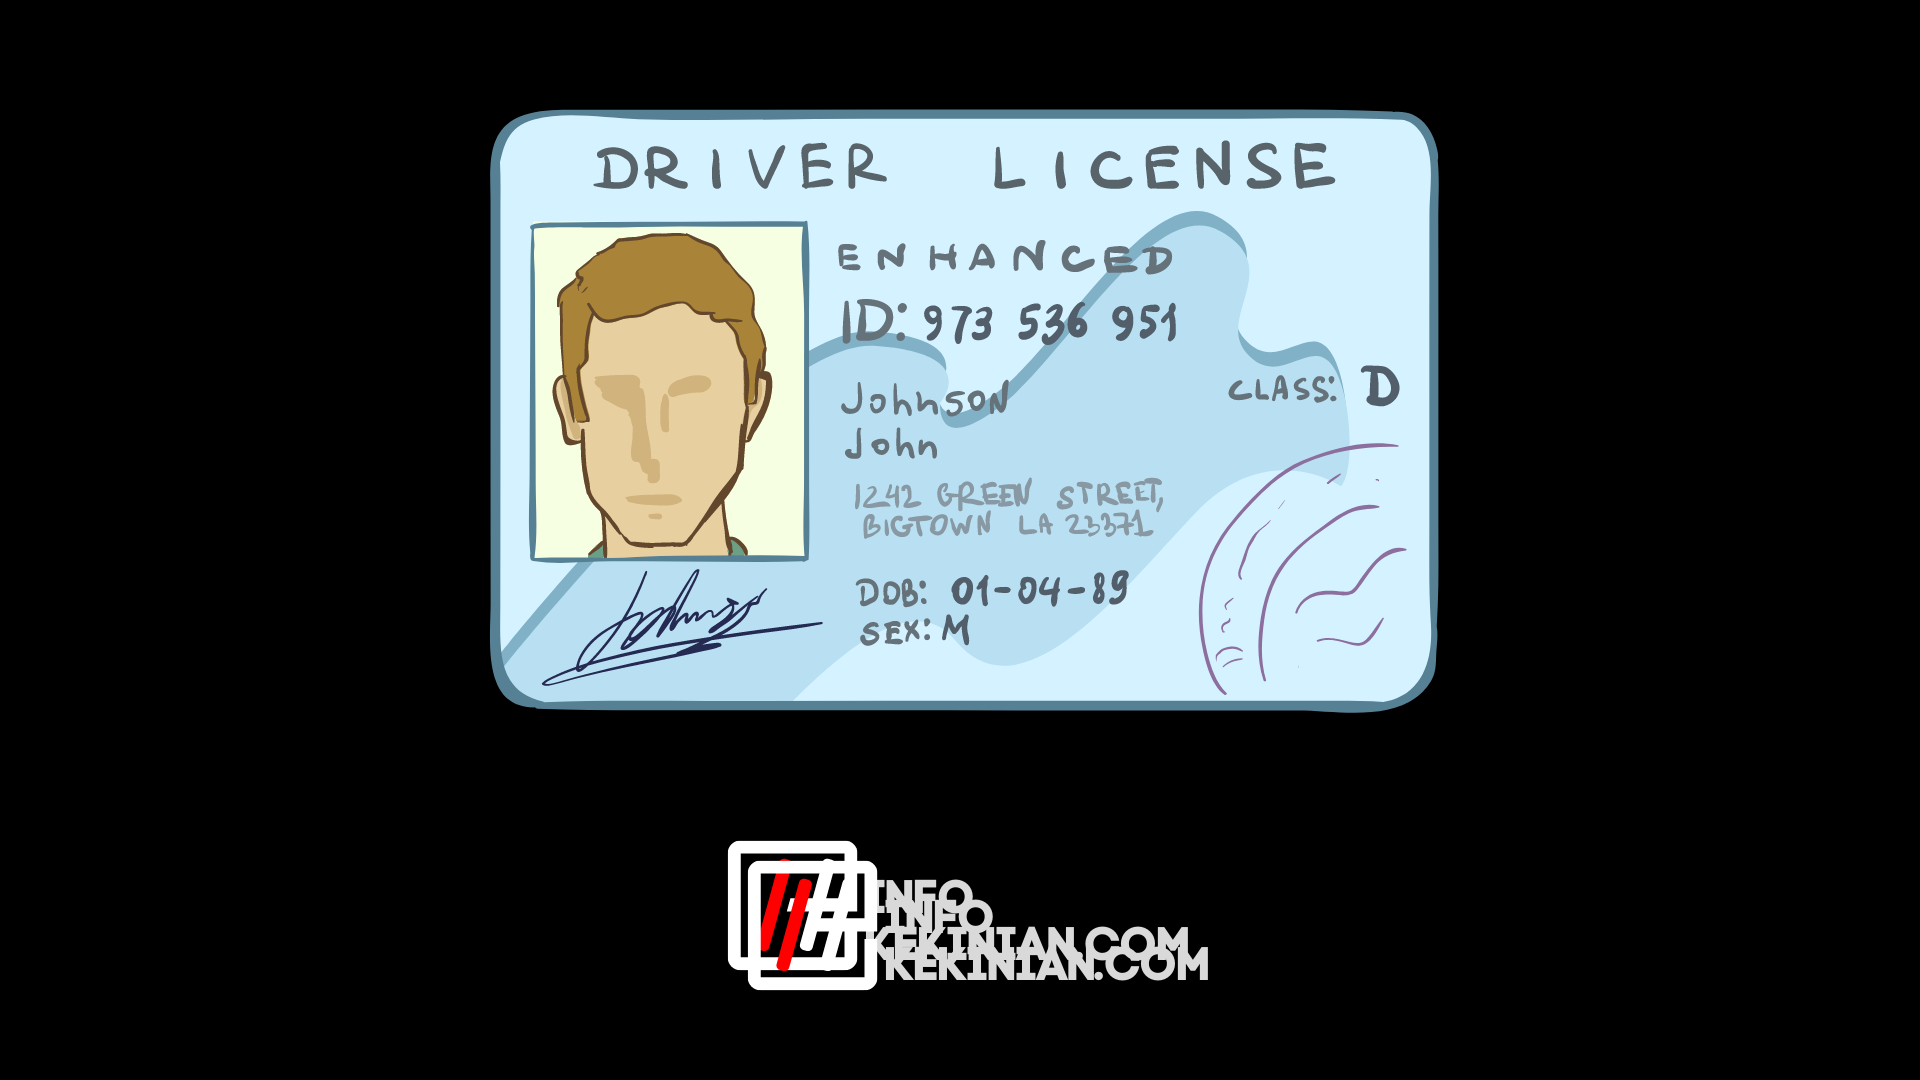 How to Make a Driving License